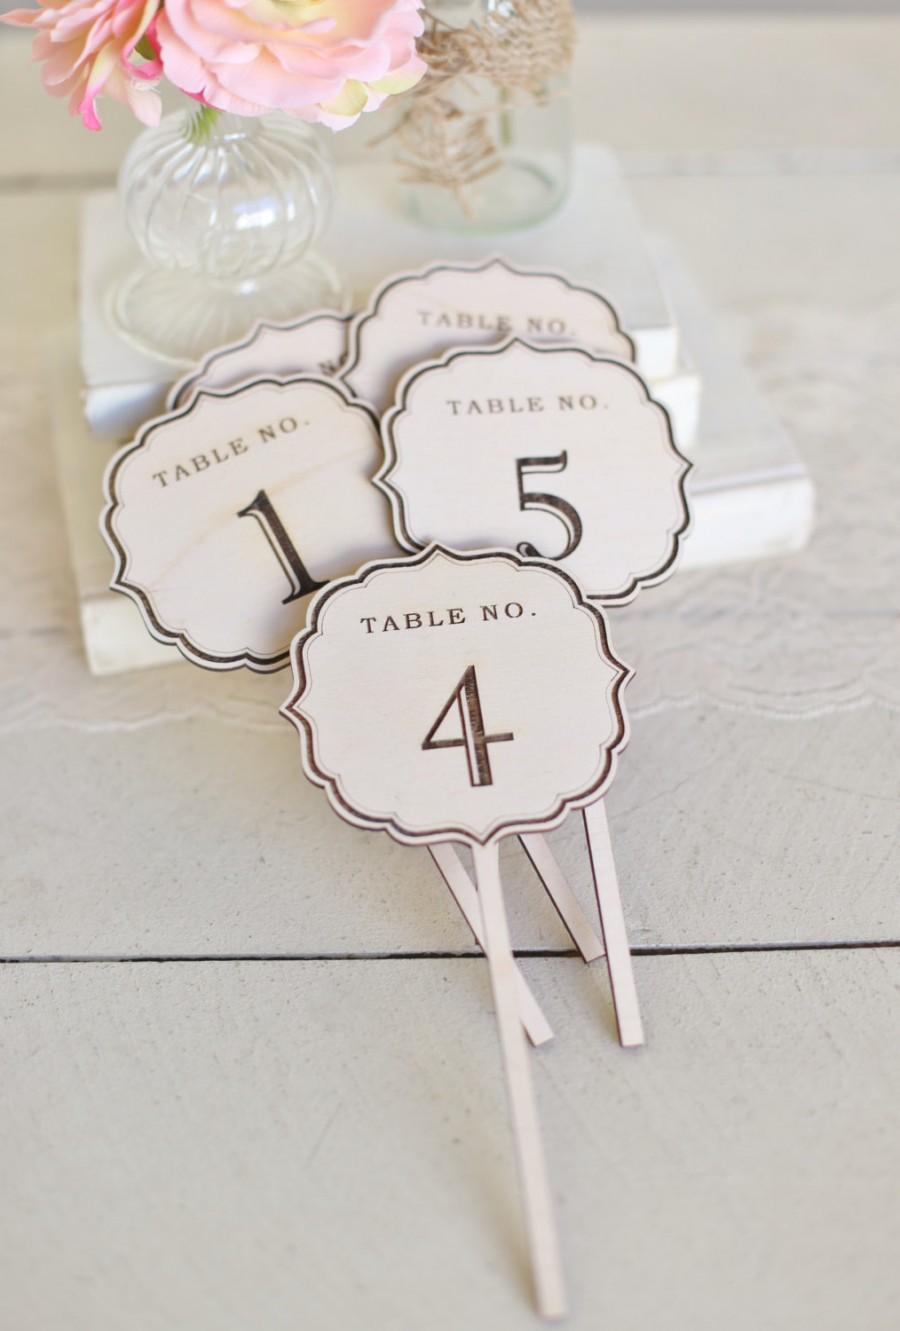 Mariage - Rustic Wood Table Numbers Vintage Inspired Wedding by Morgann Hill Designs  